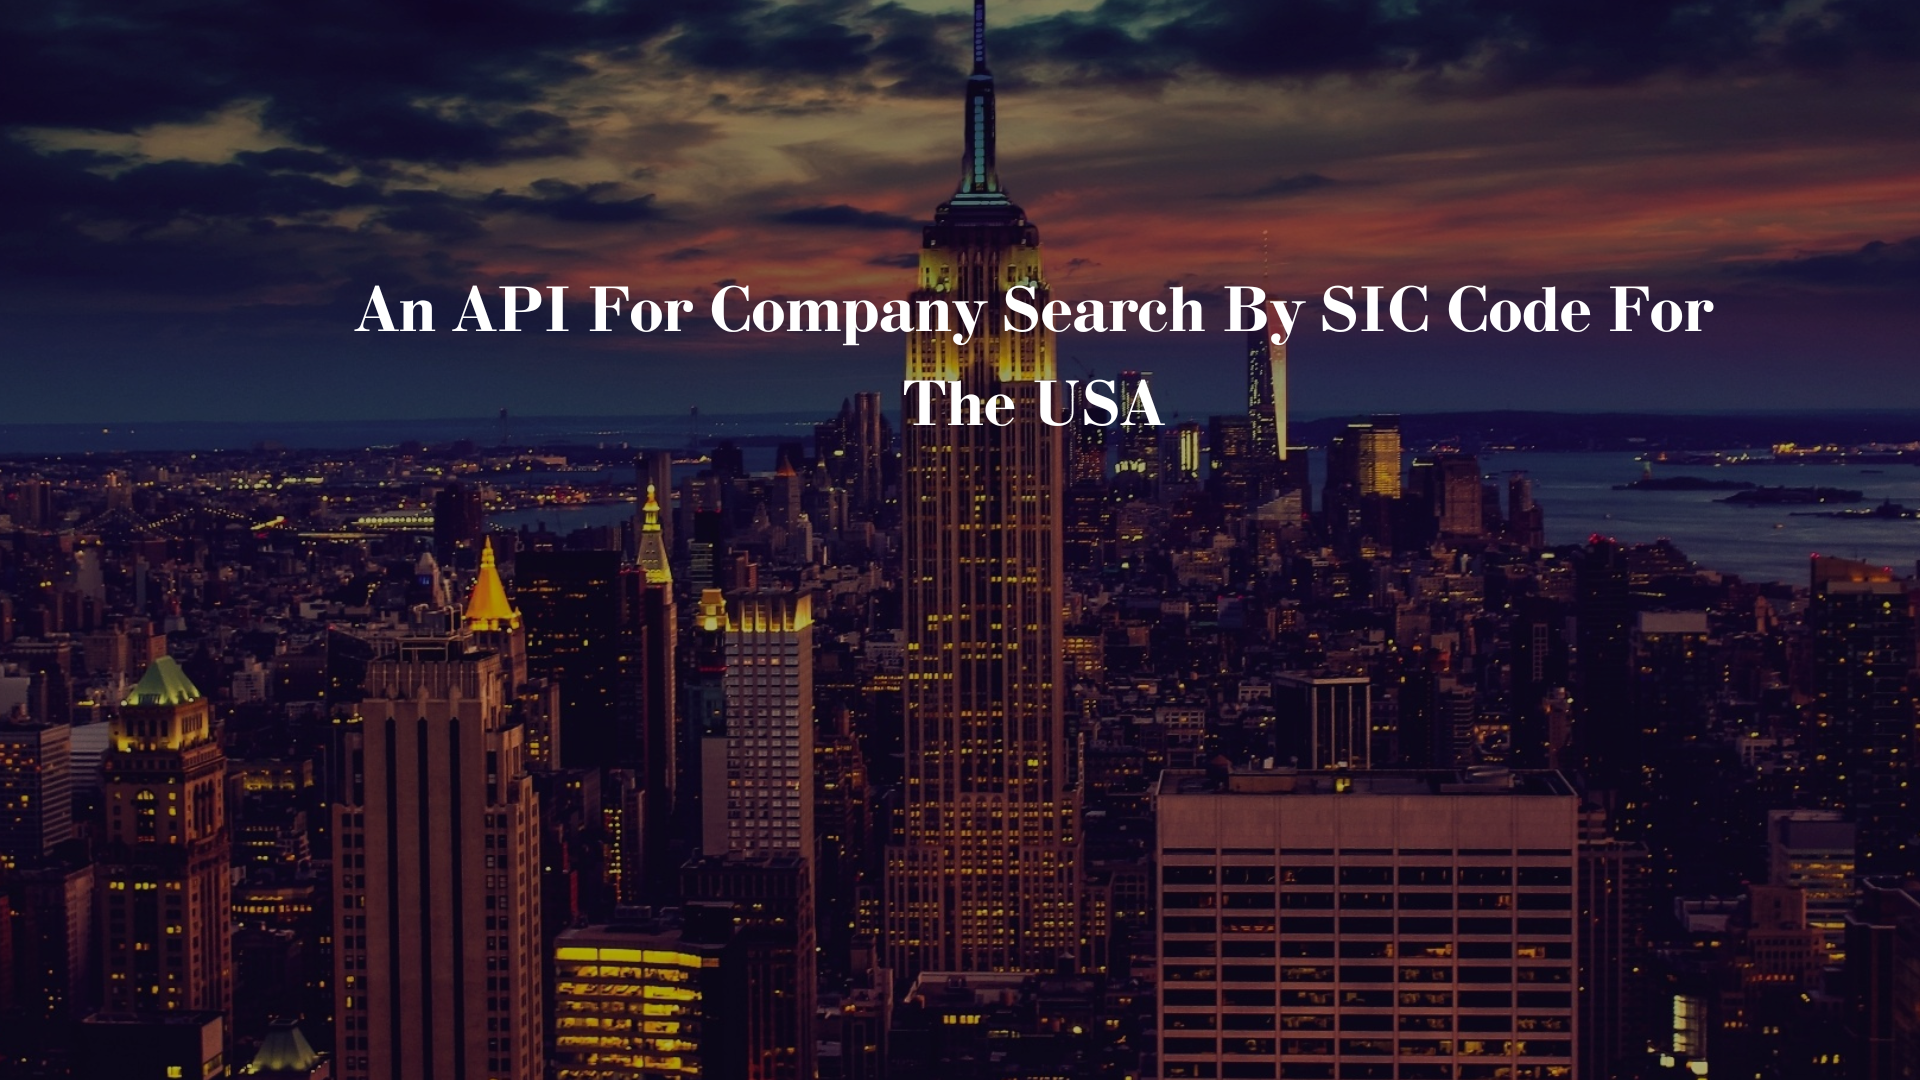 An API For Company Search By SIC Code For The USA